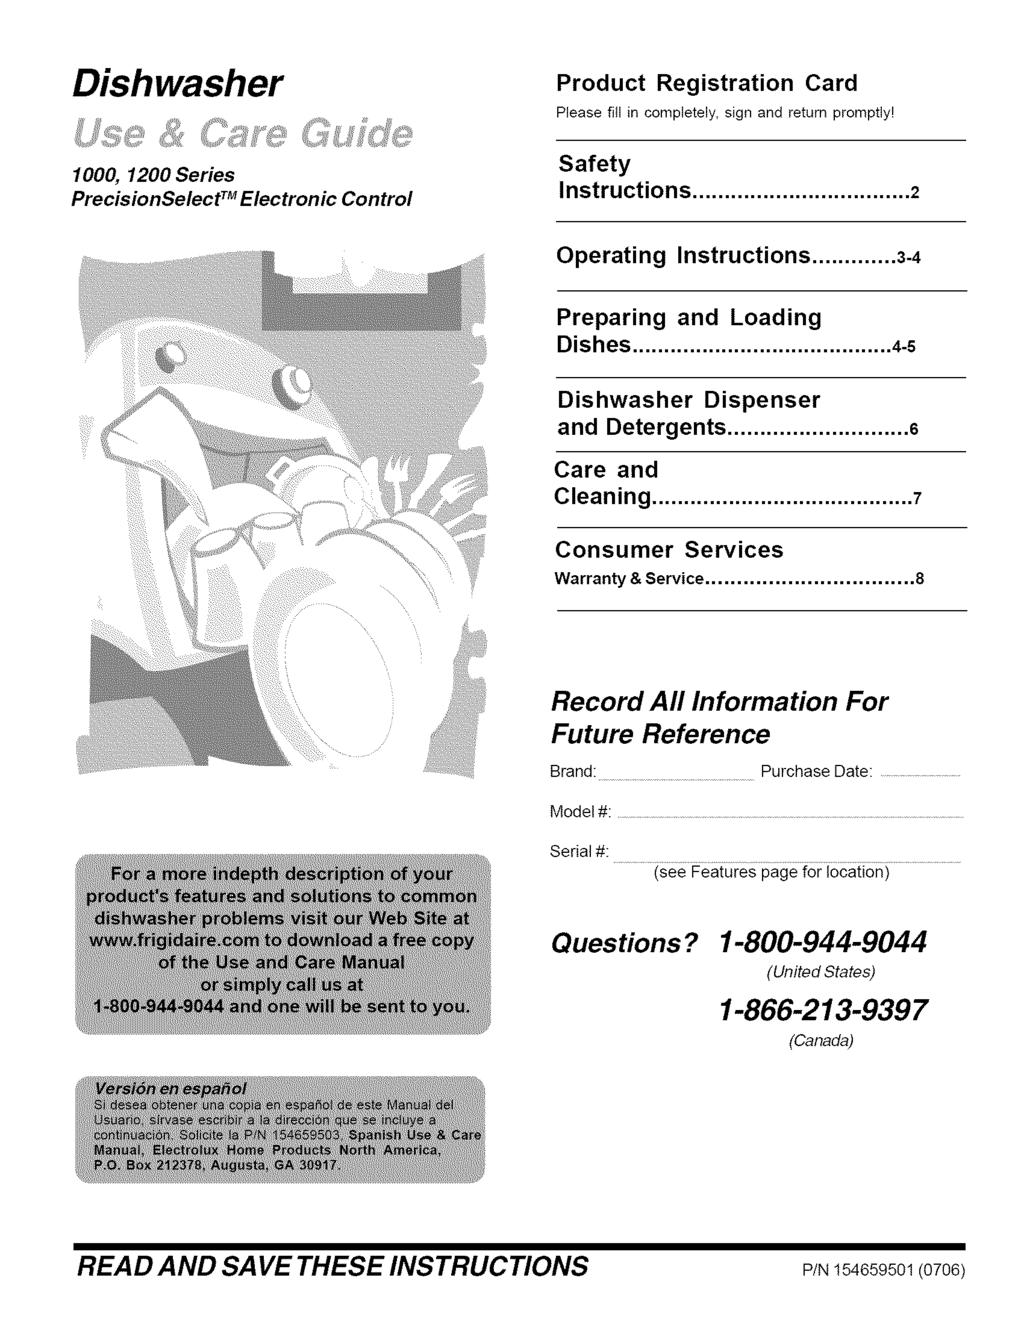 Dishwasher Product Registration Card Please fill in completely, sign and return promptly! 1000, 1200 Series PrecisionSelect TM Electronic Control Safety Instructions... 2 Operating Instructions.